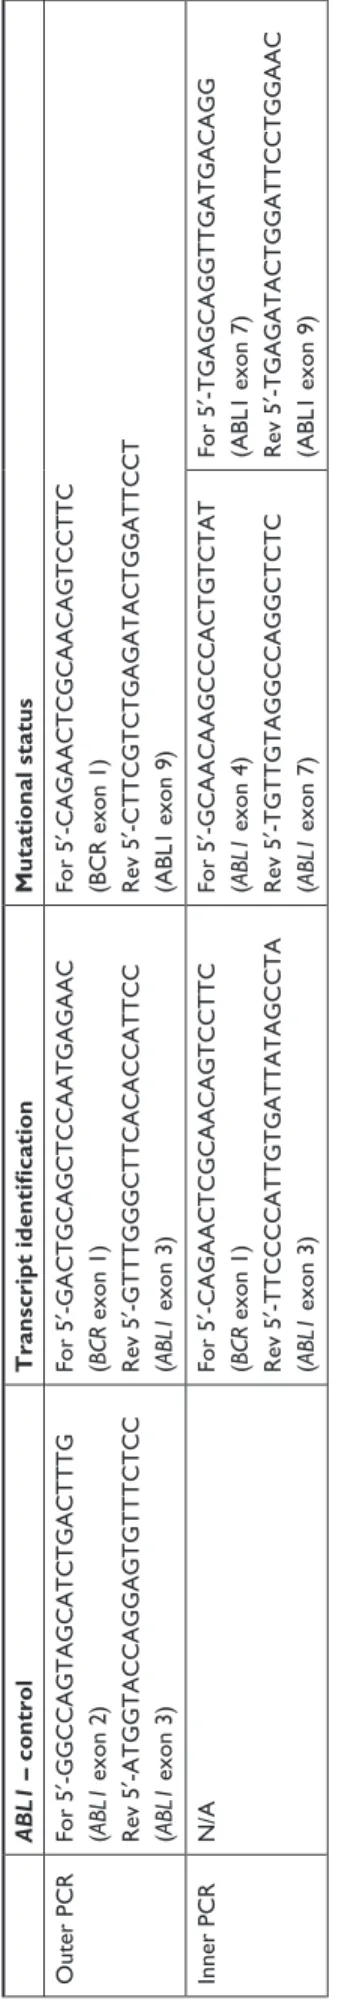 Table S1 Nested-PCR primers for the amplification of ABL1, BCR-ABL1 transcript identification and analysis of BCR-ABL1 mutational status ABL1 – controlTranscript identificationMutational status Outer pCrFor 5′-GGCCaGTaGCaTCTGaCTTTG  (ABL1 exon 2) rev 5′-aT